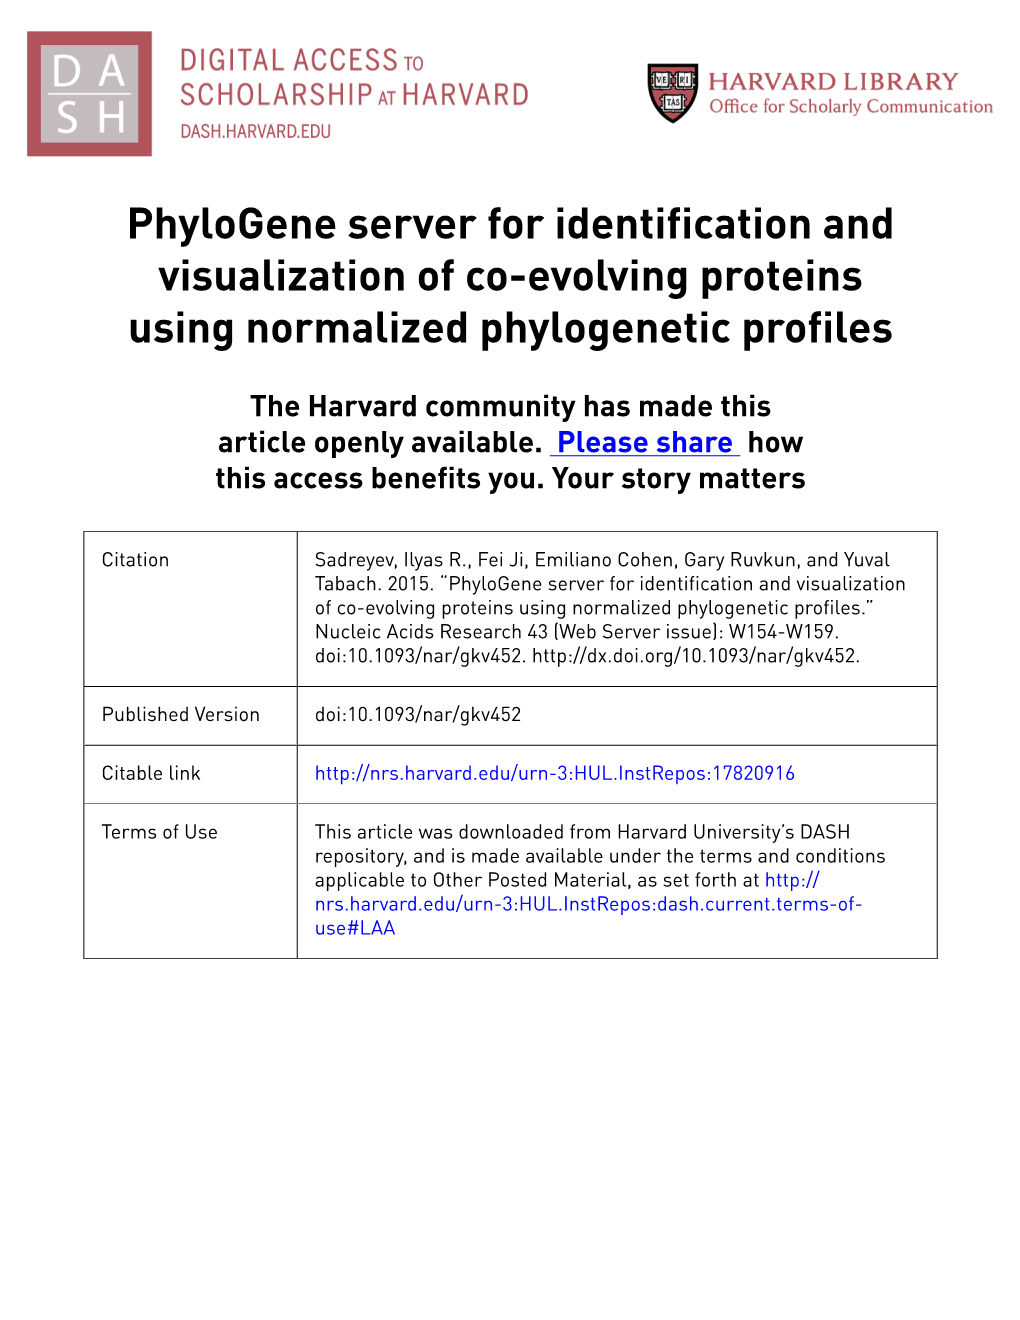 Phylogene Server for Identification and Visualization of Co-Evolving Proteins Using Normalized Phylogenetic Profiles